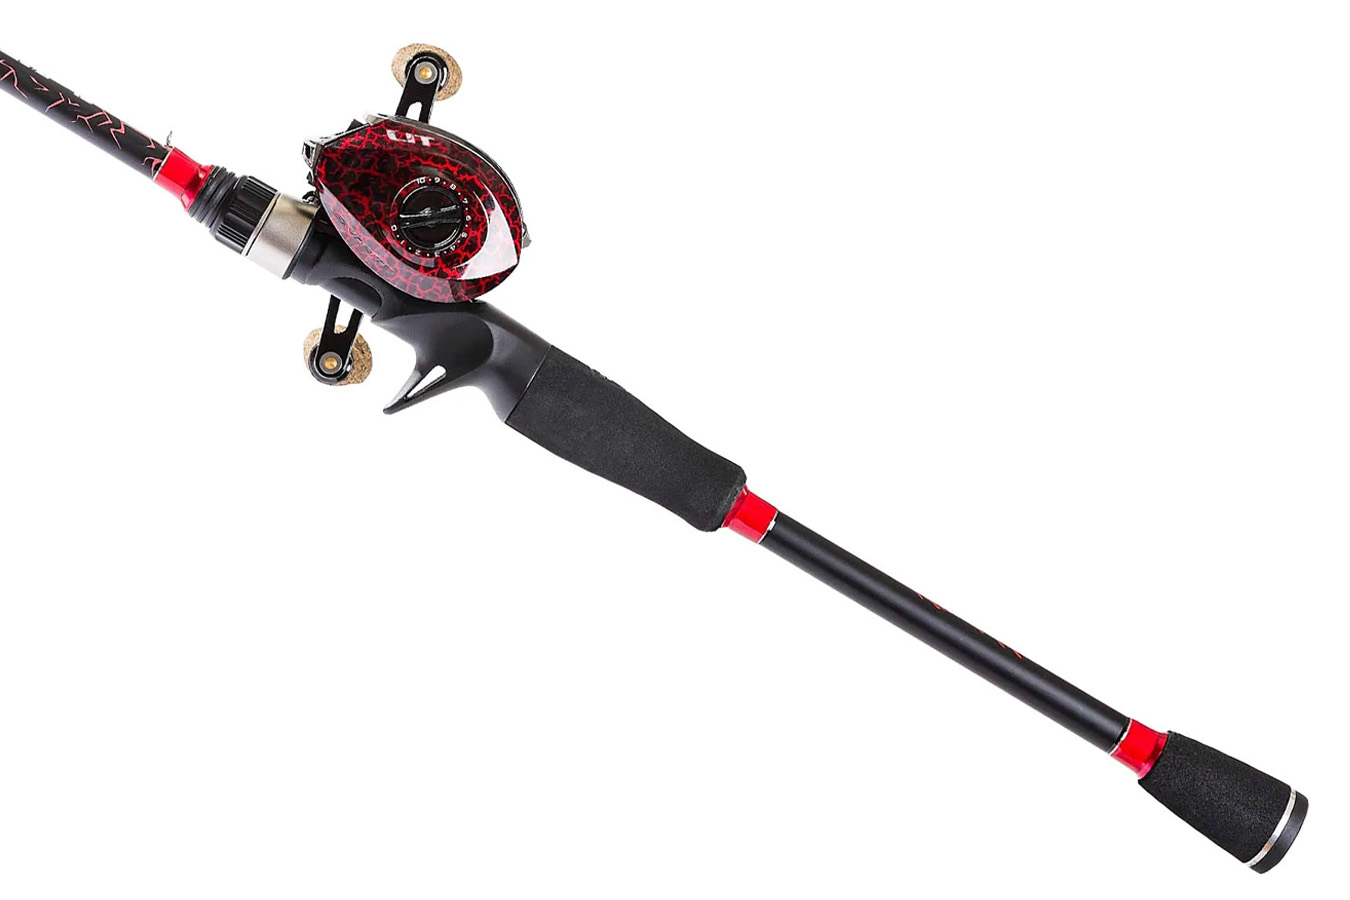 Discount Favorite Lit 7ft 3in Casting Combo Left Hand for Sale, Online Fishing  Rod/Reel Combo Store